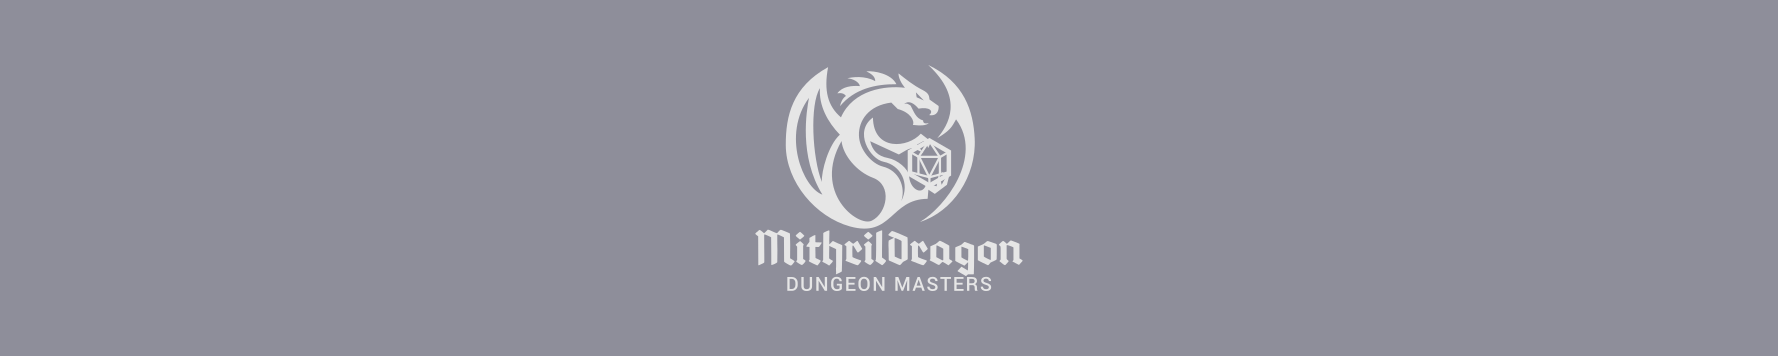 The final logo for Mithril Dragon Dungeon Masters